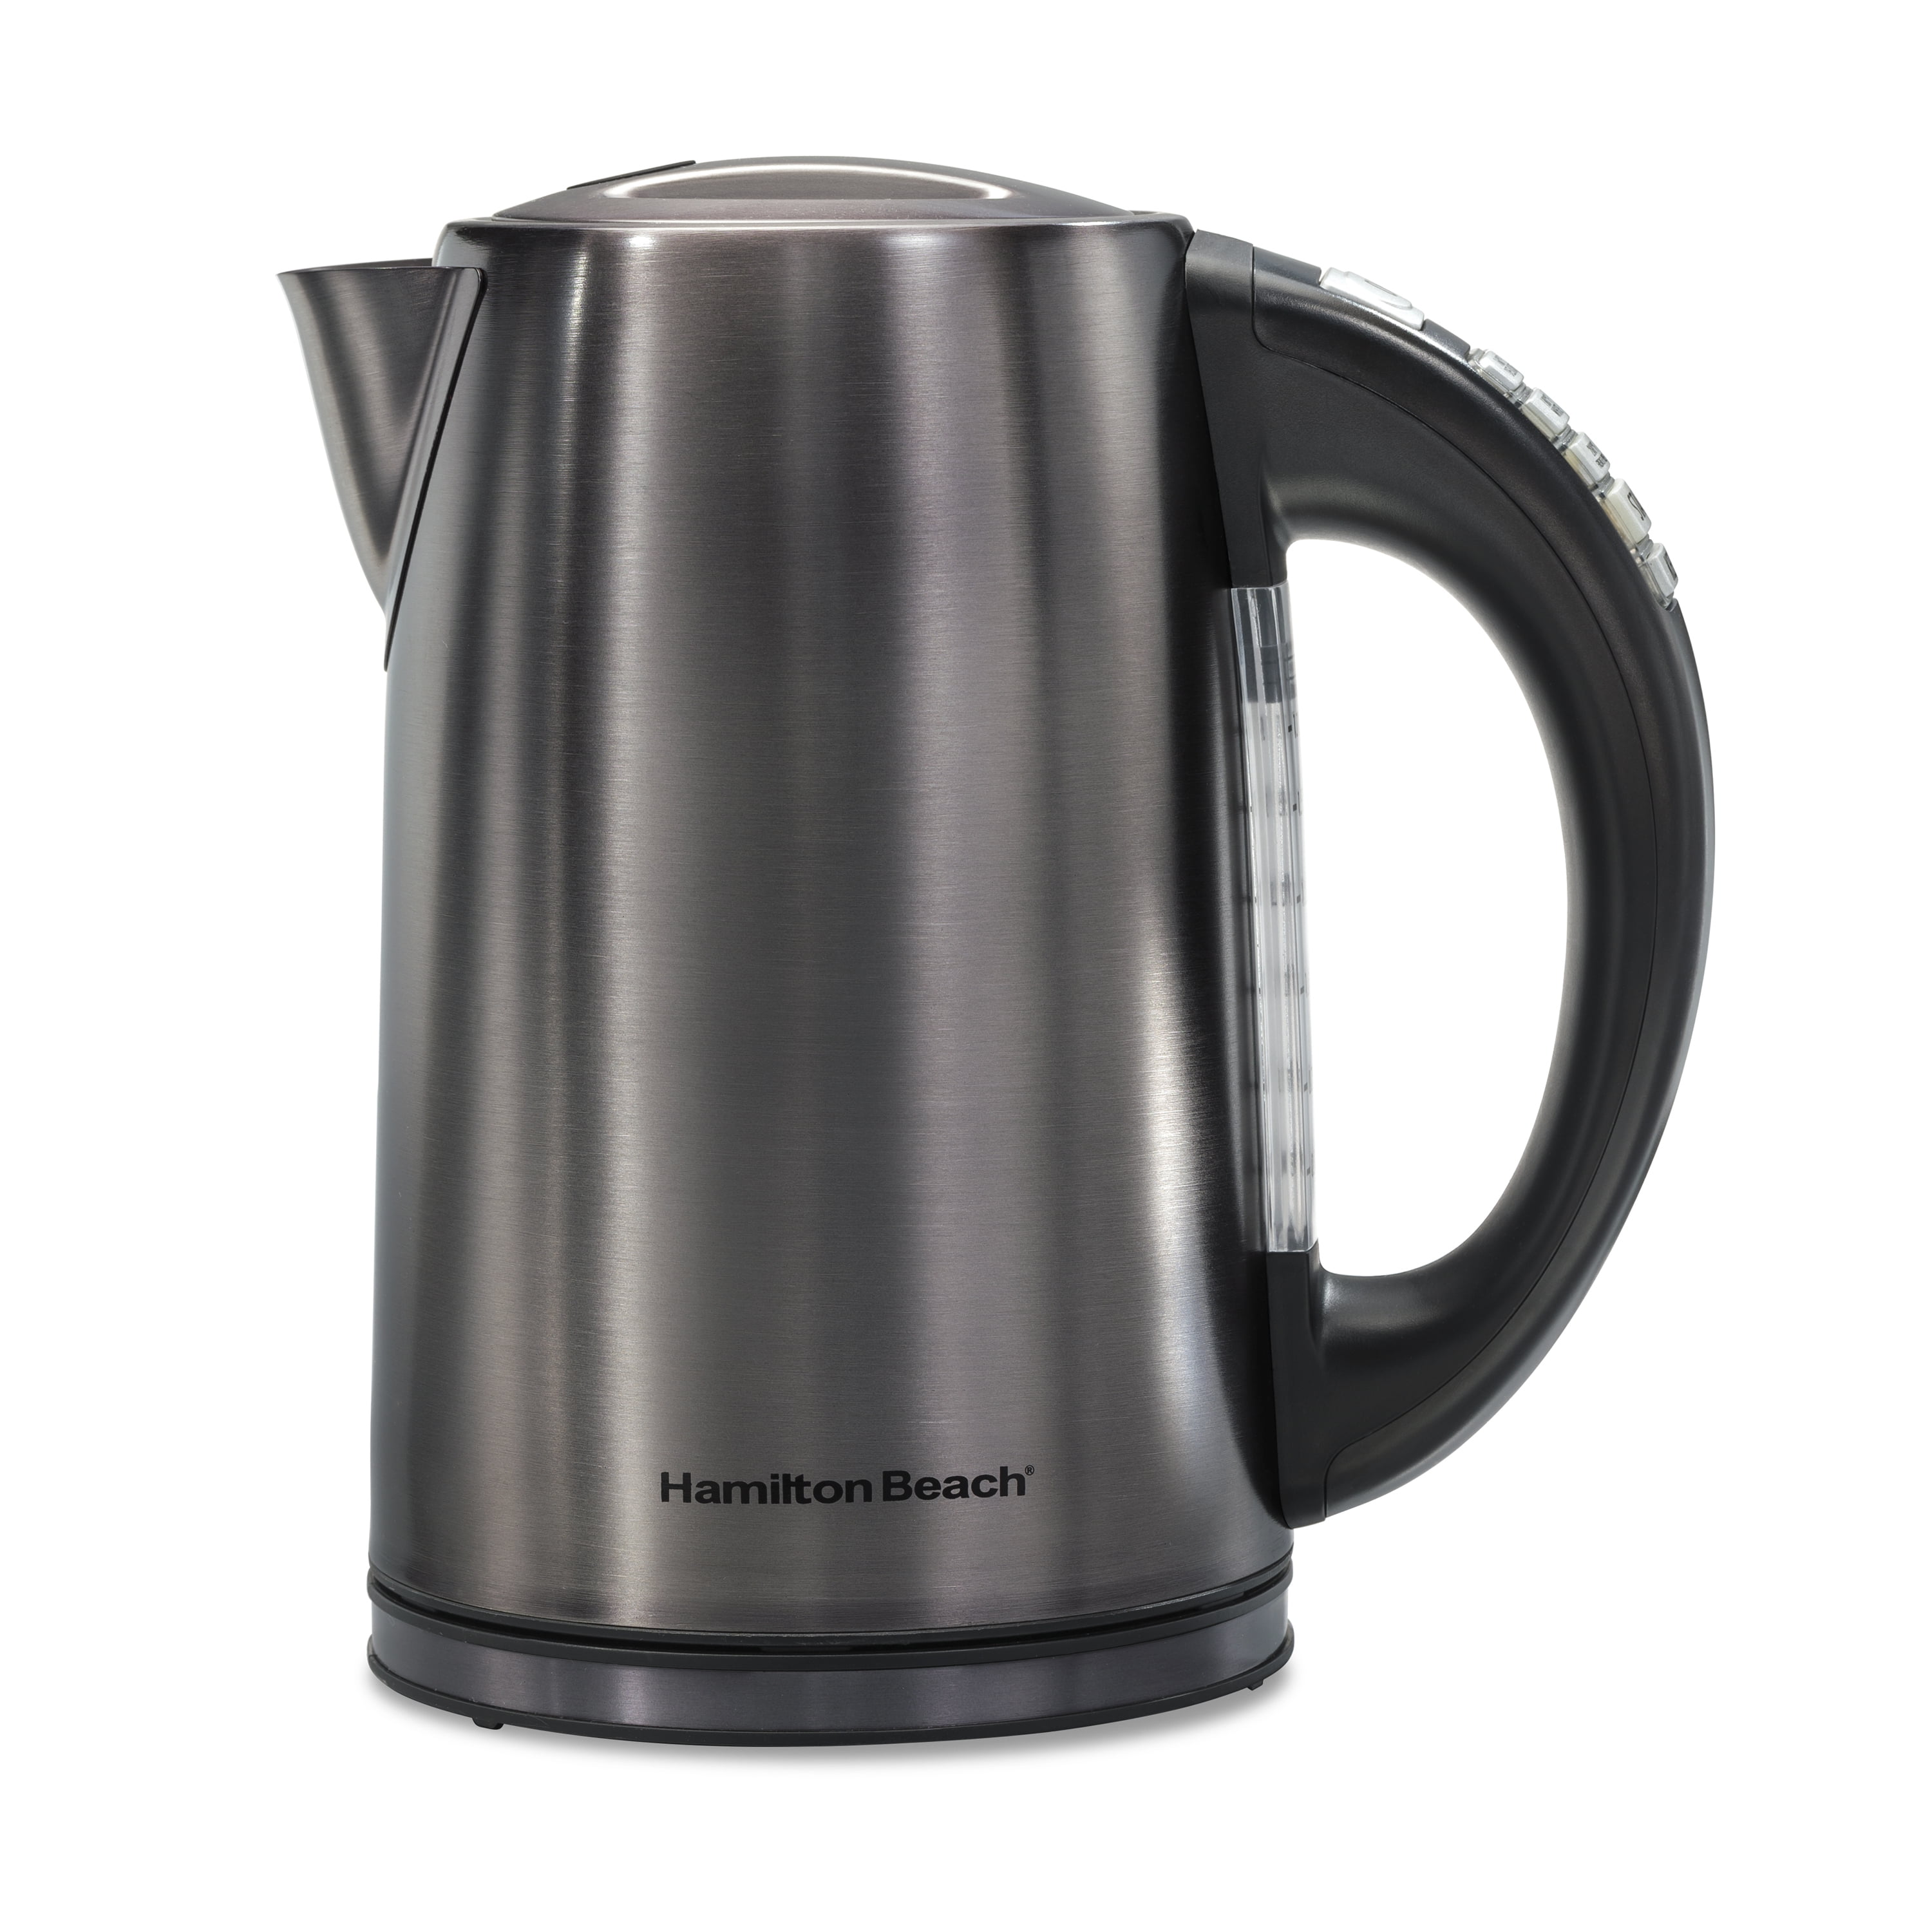 Hamilton Beach 1.7 Liter Variable Temperature Electric Kettle Model 41022, Brushed Black Stainless Steel